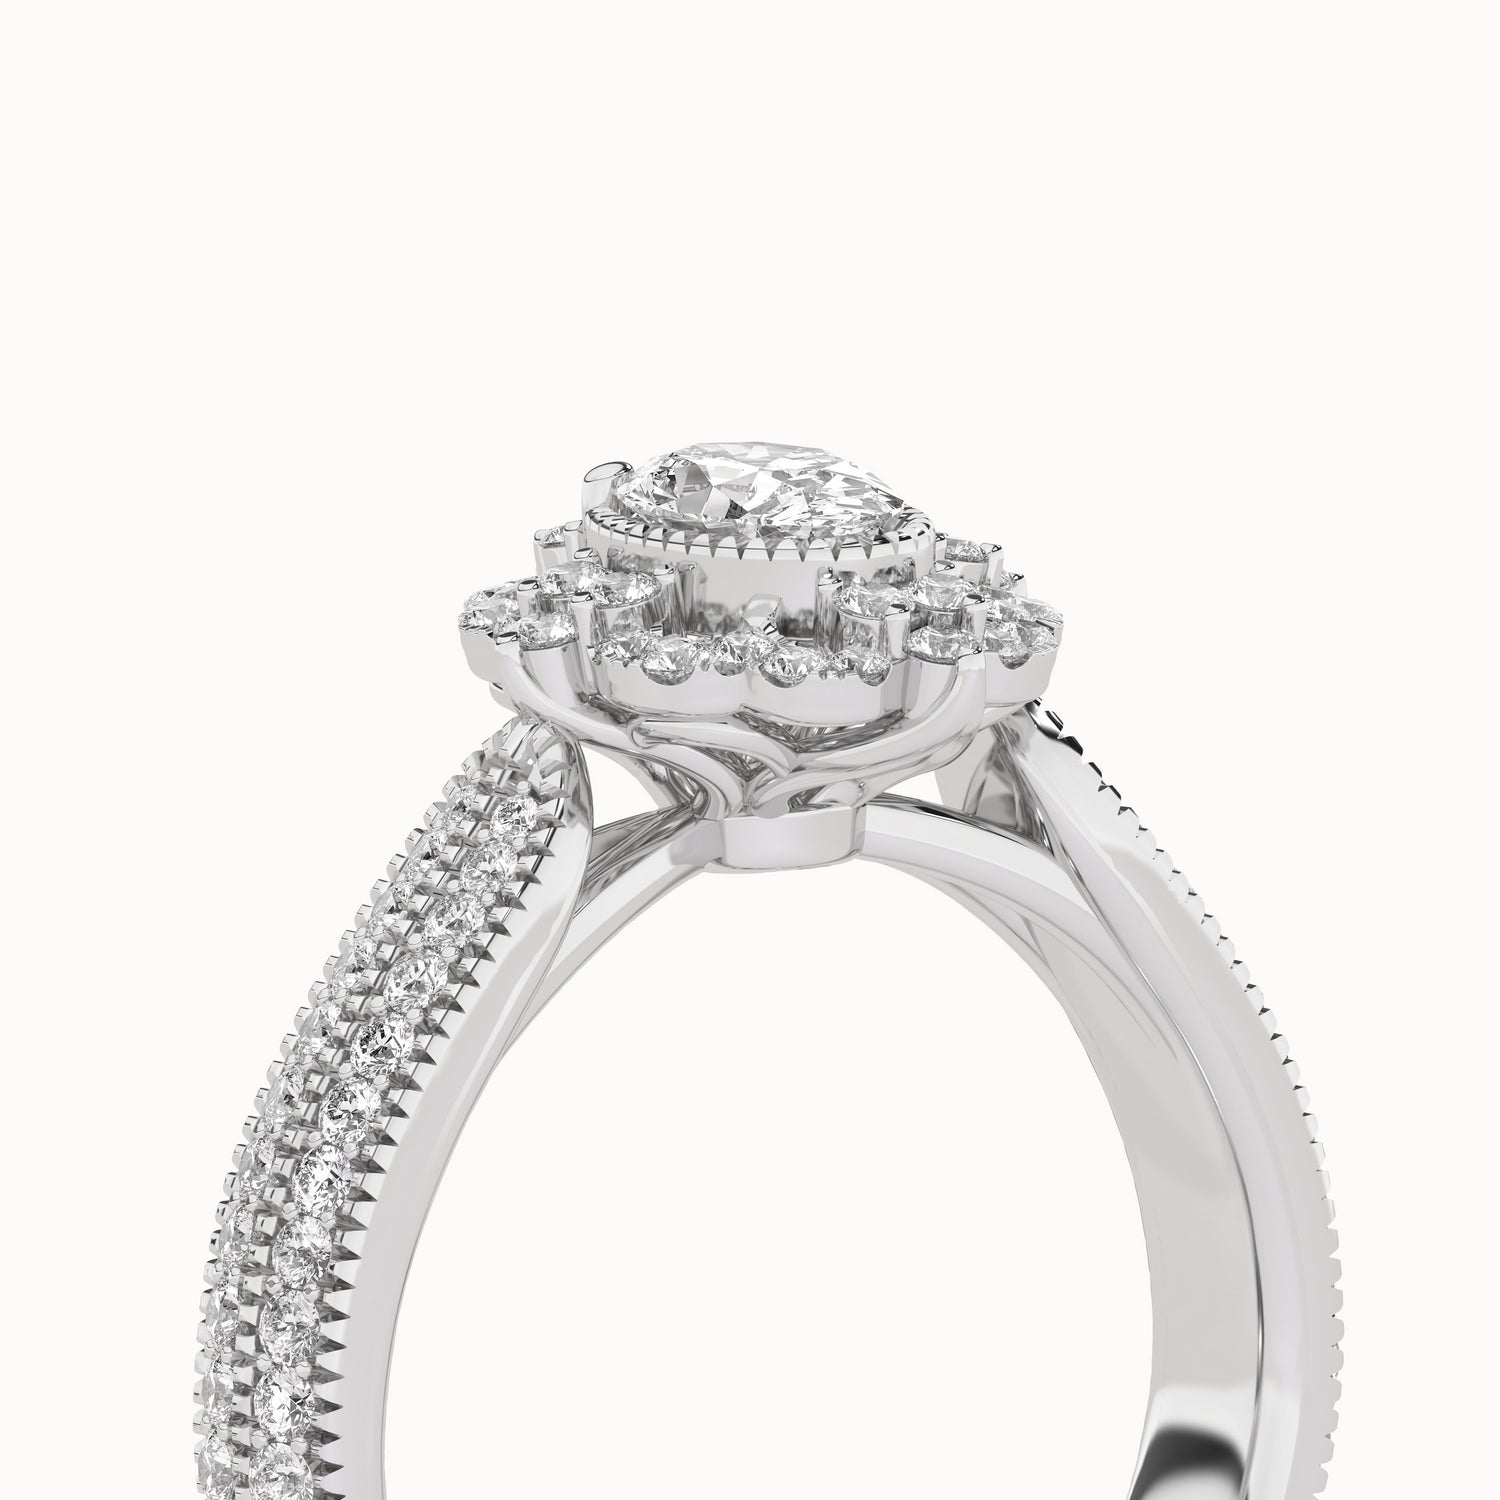 Ornate Ellipse Ring_Product Angle_1Ct - 5